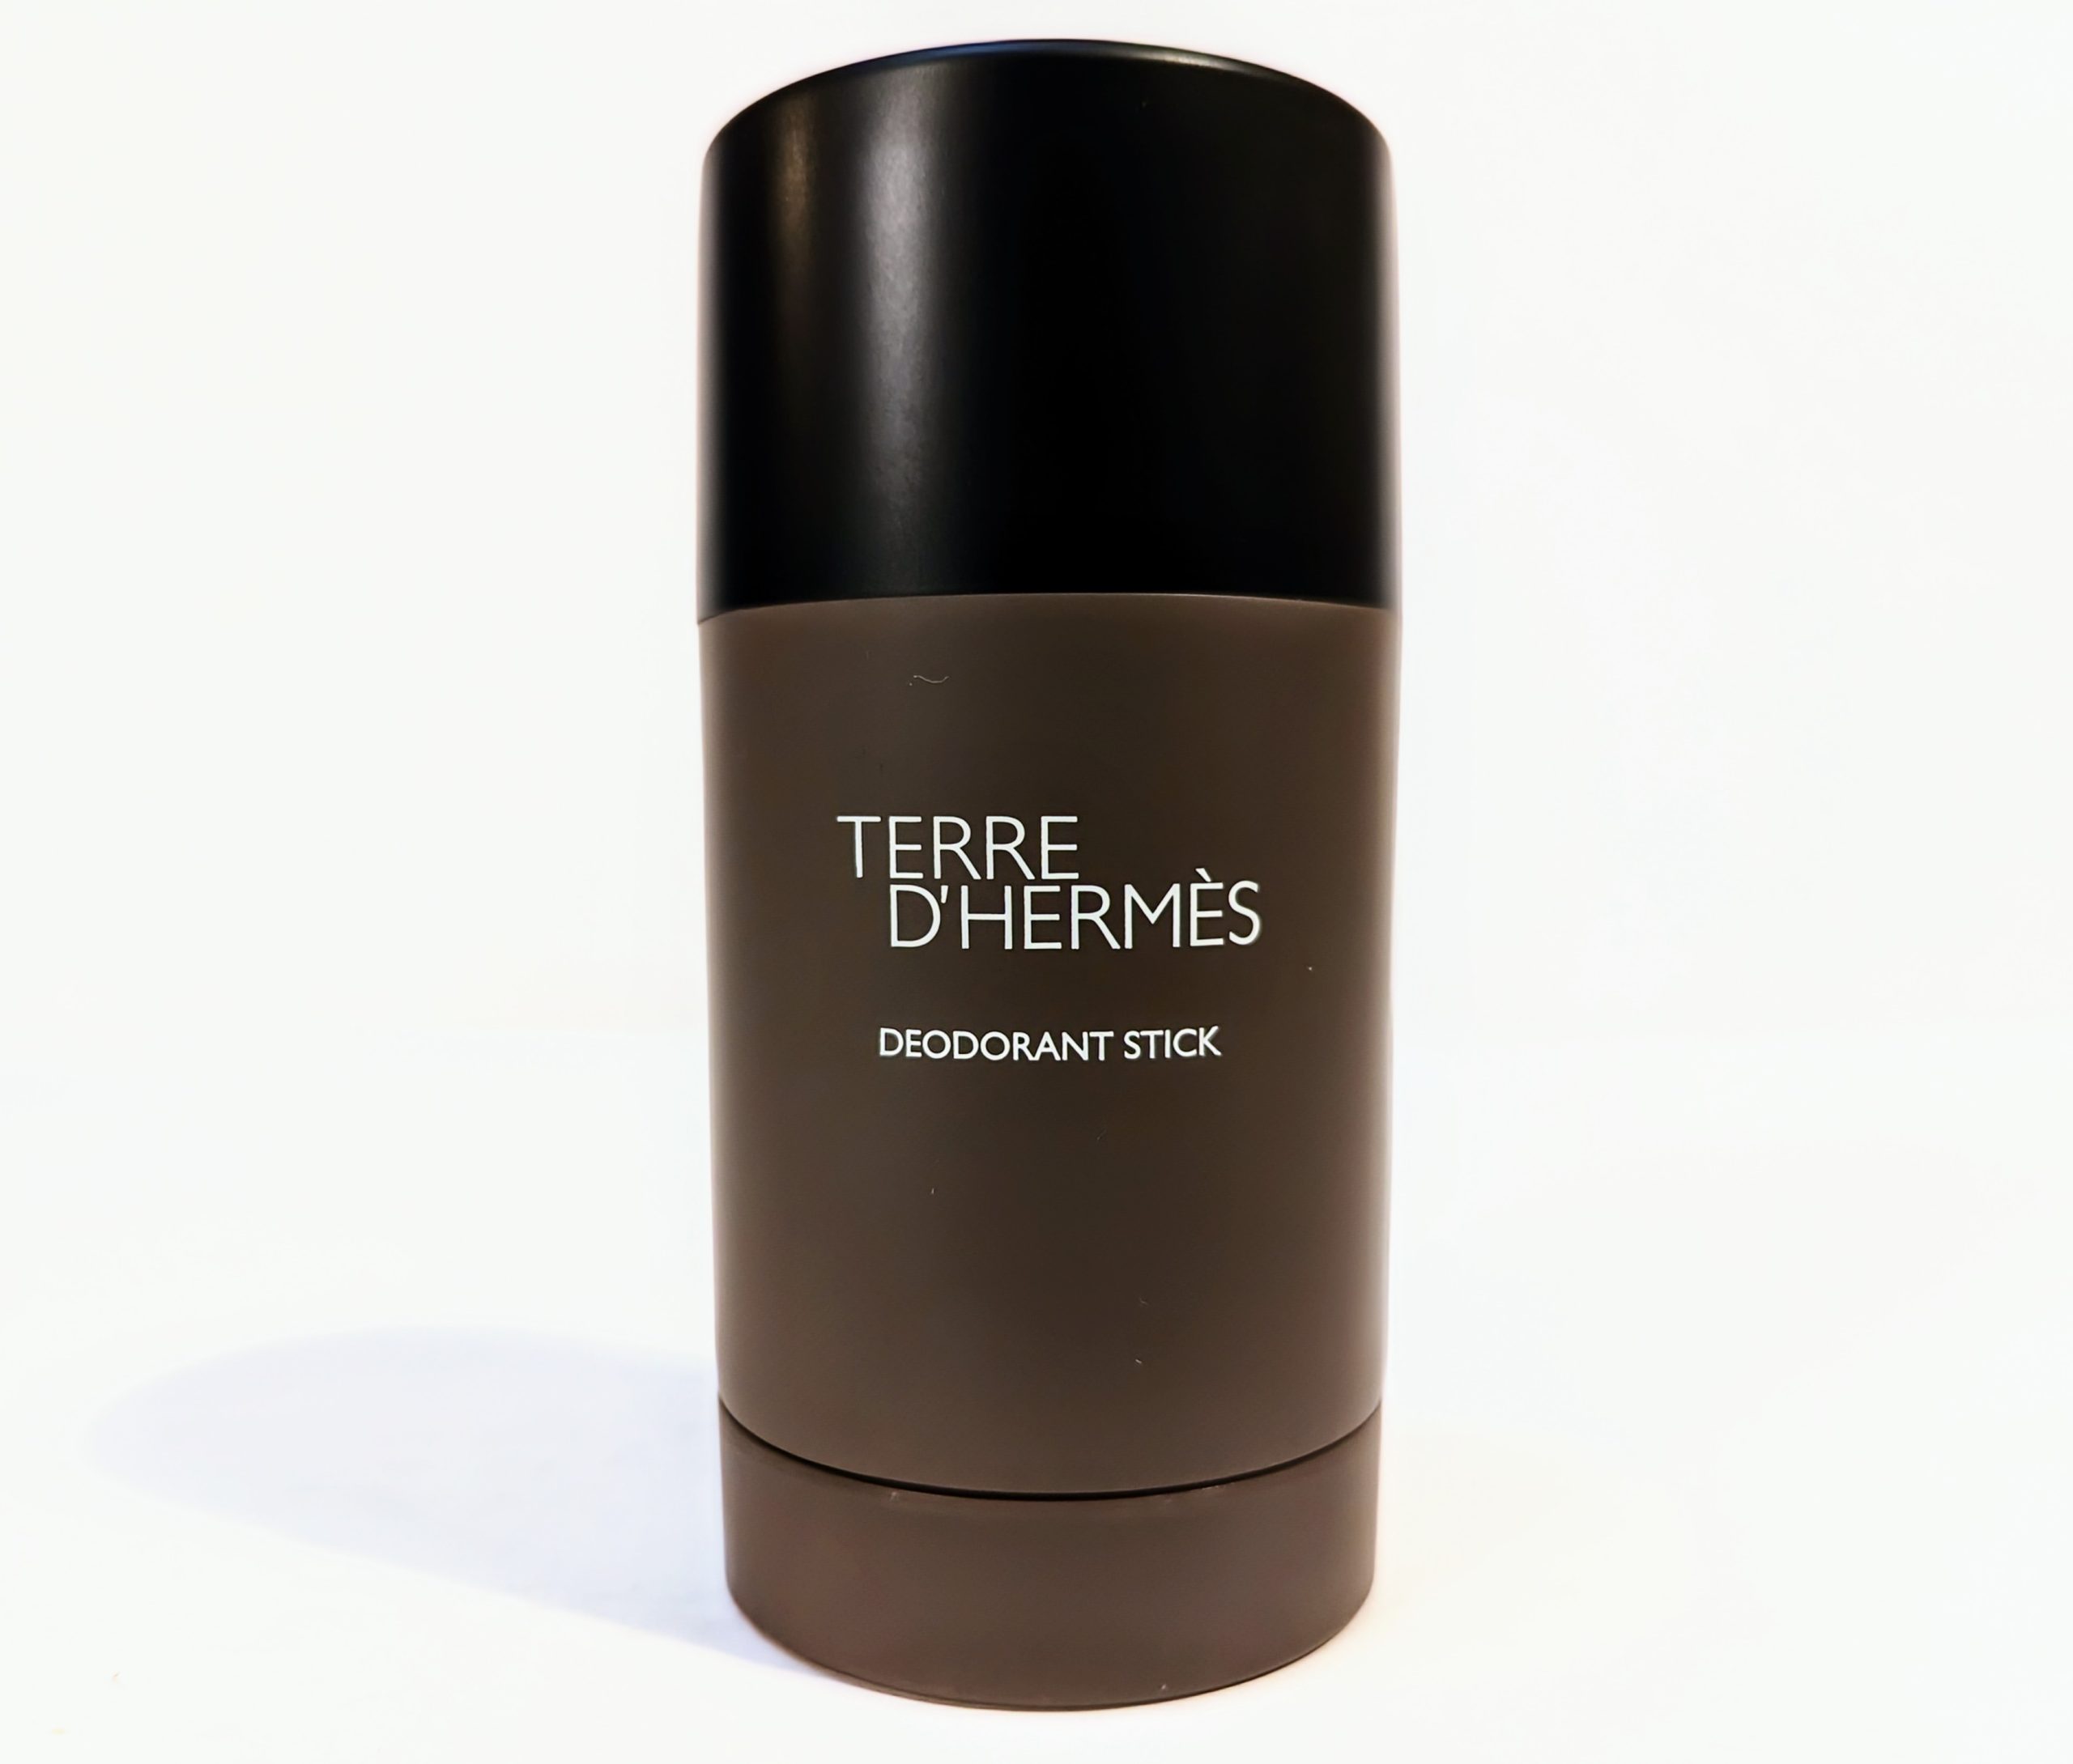 A Terre D’Hermès deodorant stick in a cylindrical, dark brown container with a black cap, standing upright against a white background.